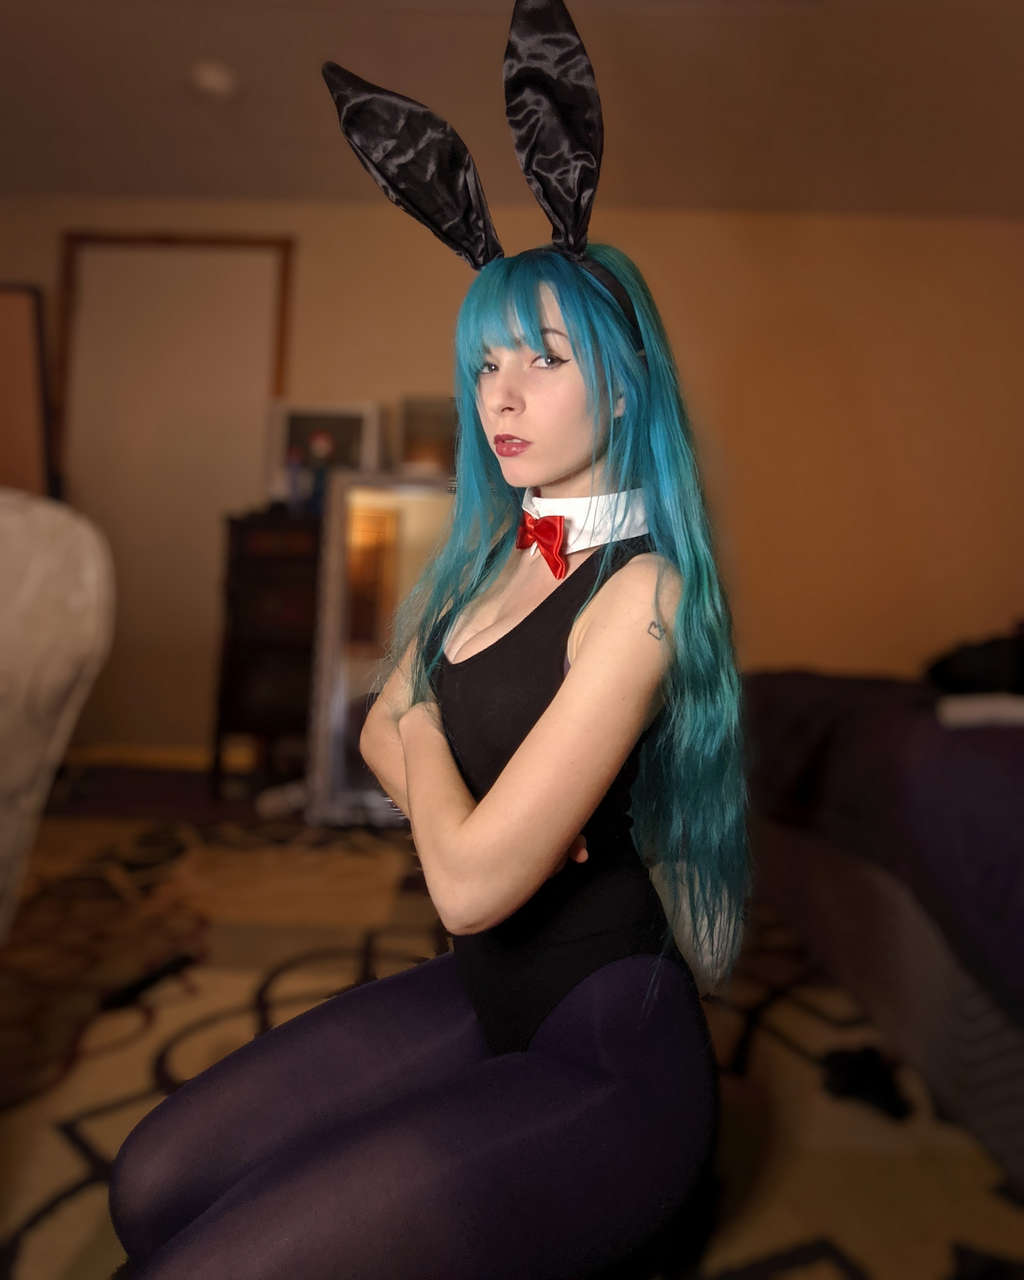 People Always Ask If I Dyed My Hair Blue For Cosplay The Answer Is No But I Might As Well Do Bunny Girl Bulma Anywa